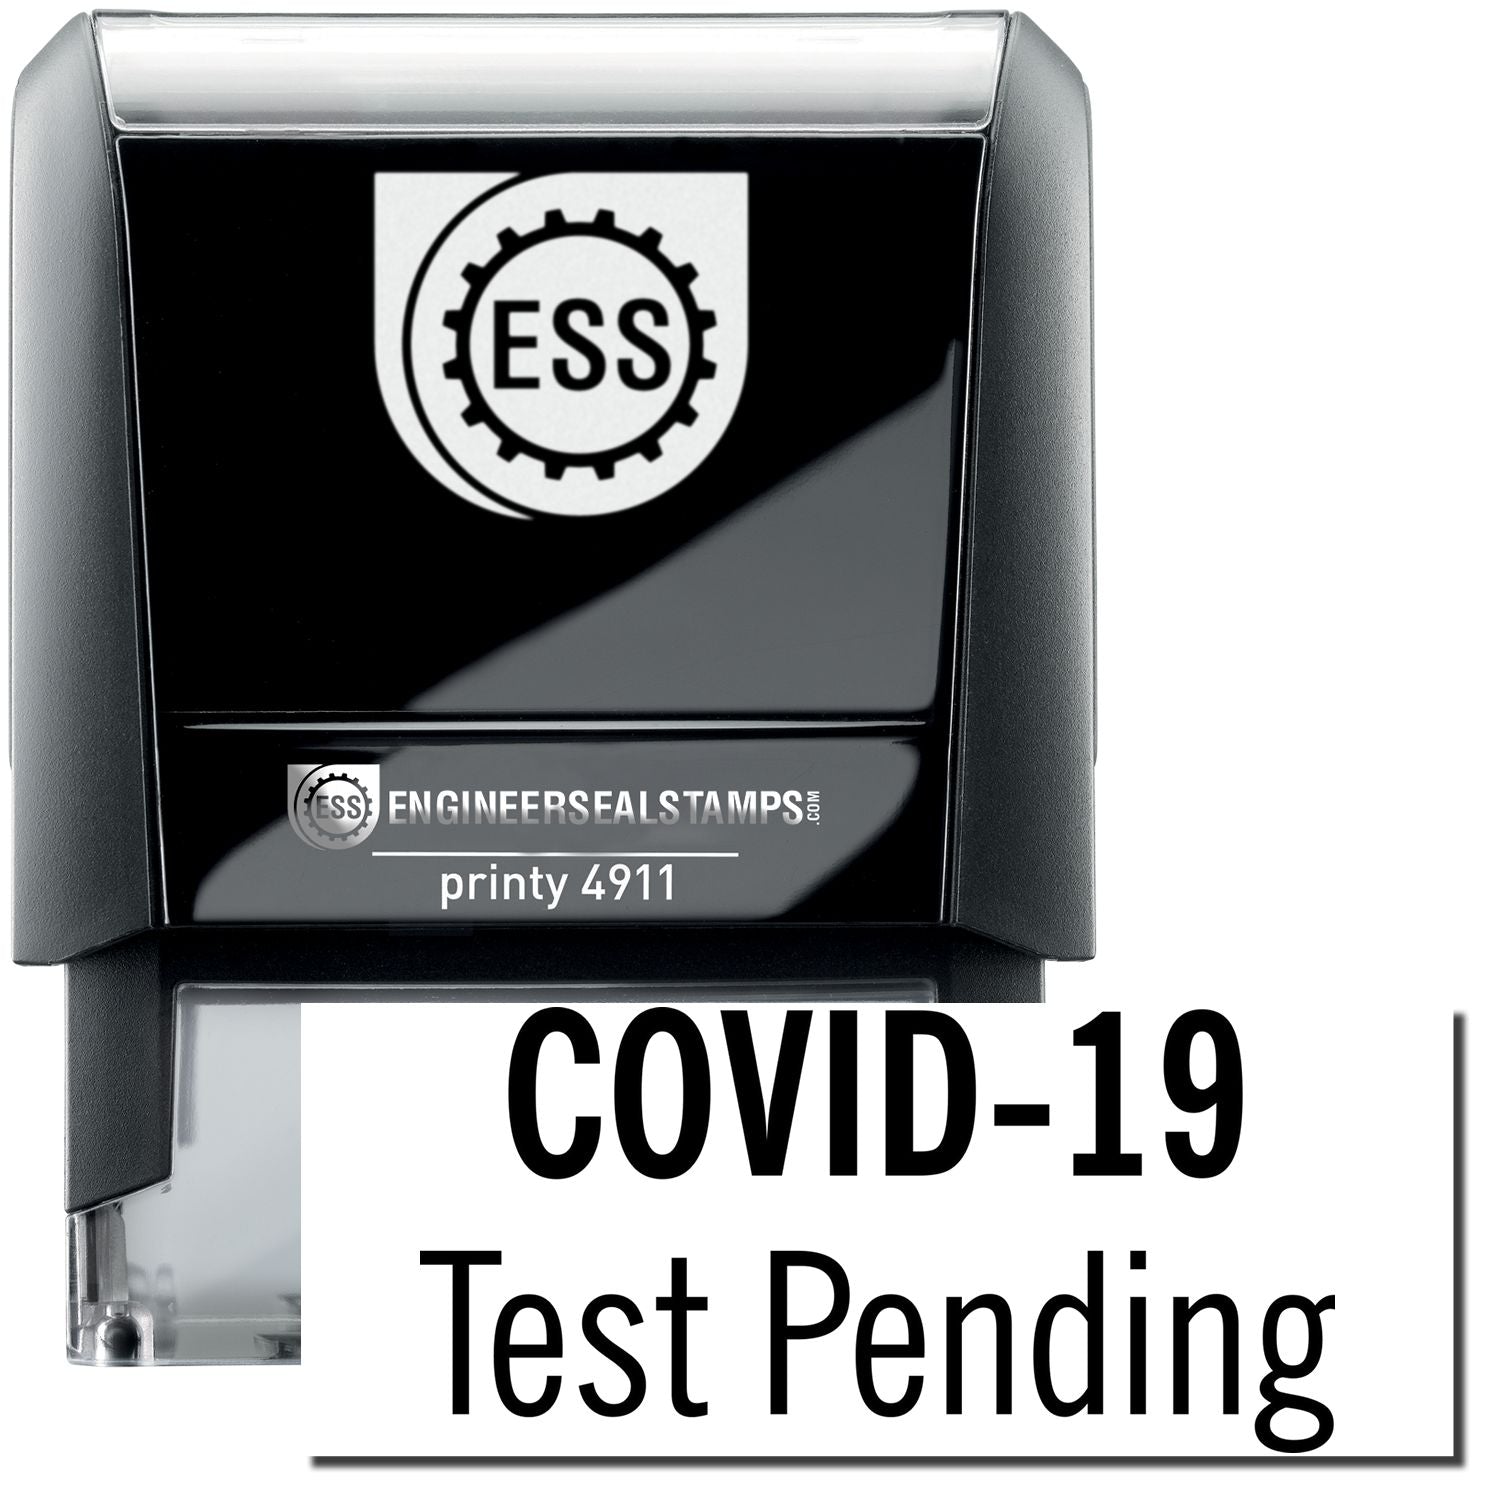 A self-inking stamp with a stamped image showing how the text "COVID-19 Test Pending" is displayed after stamping.